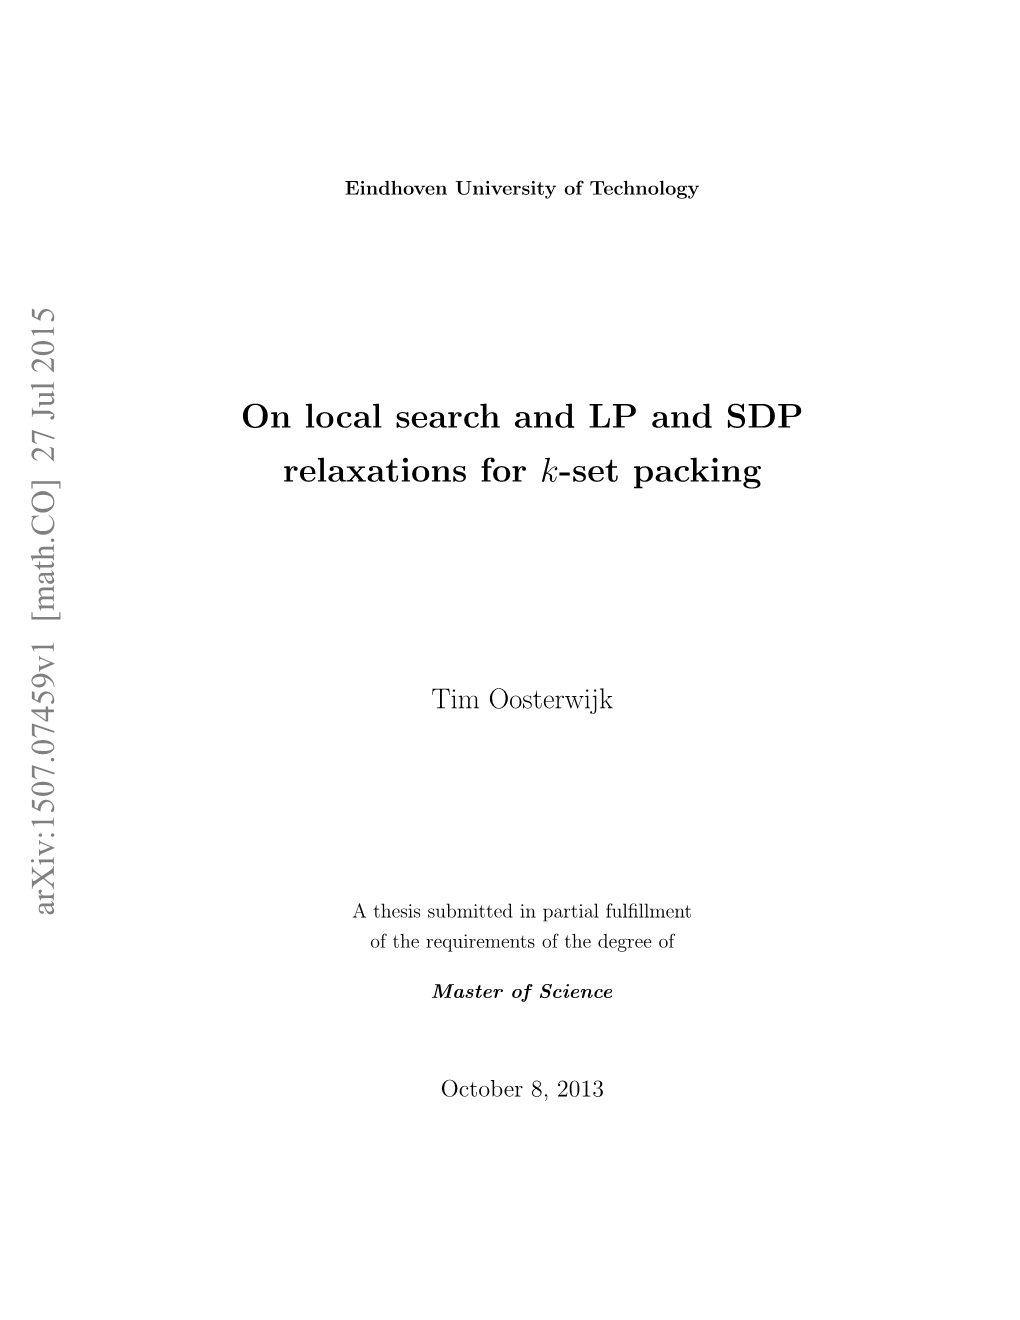 On Local Search and LP and SDP Relaxations for K-Set Packing